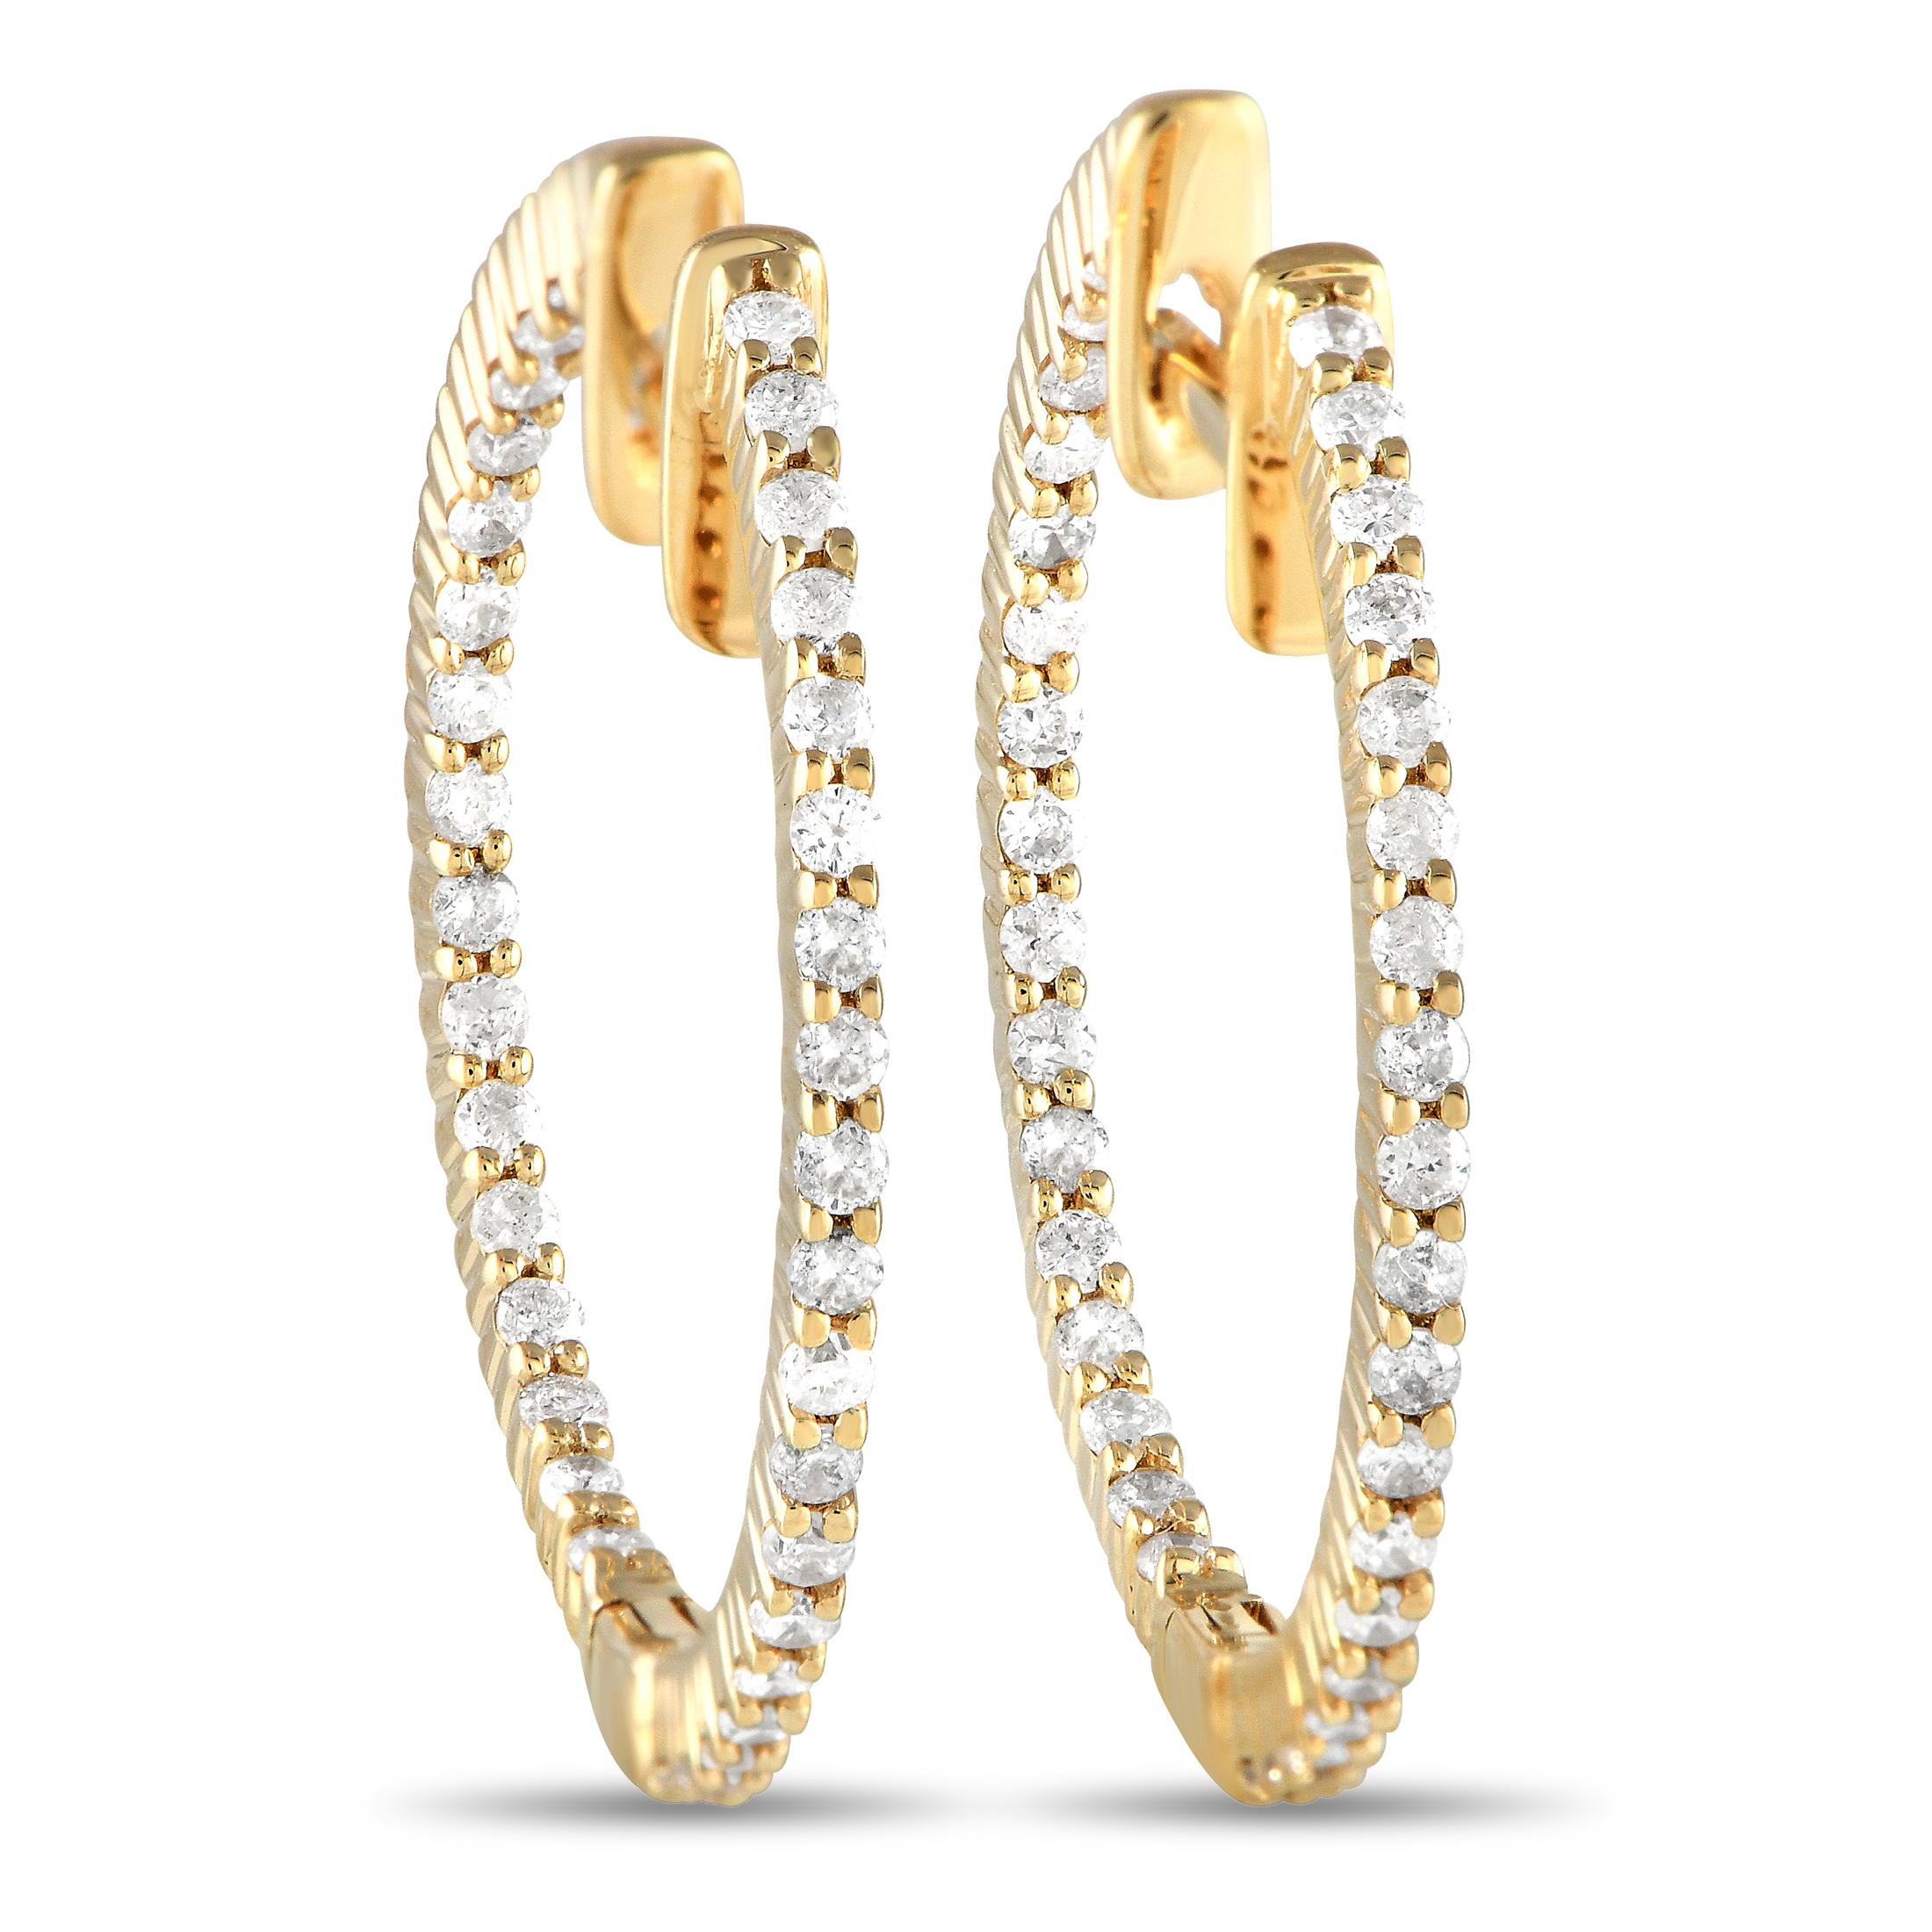 LB Exclusive 14K Gelbgold 0,55ct Diamant Inside-Out Hoop Ohrringe im Zustand „Neu“ im Angebot in Southampton, PA